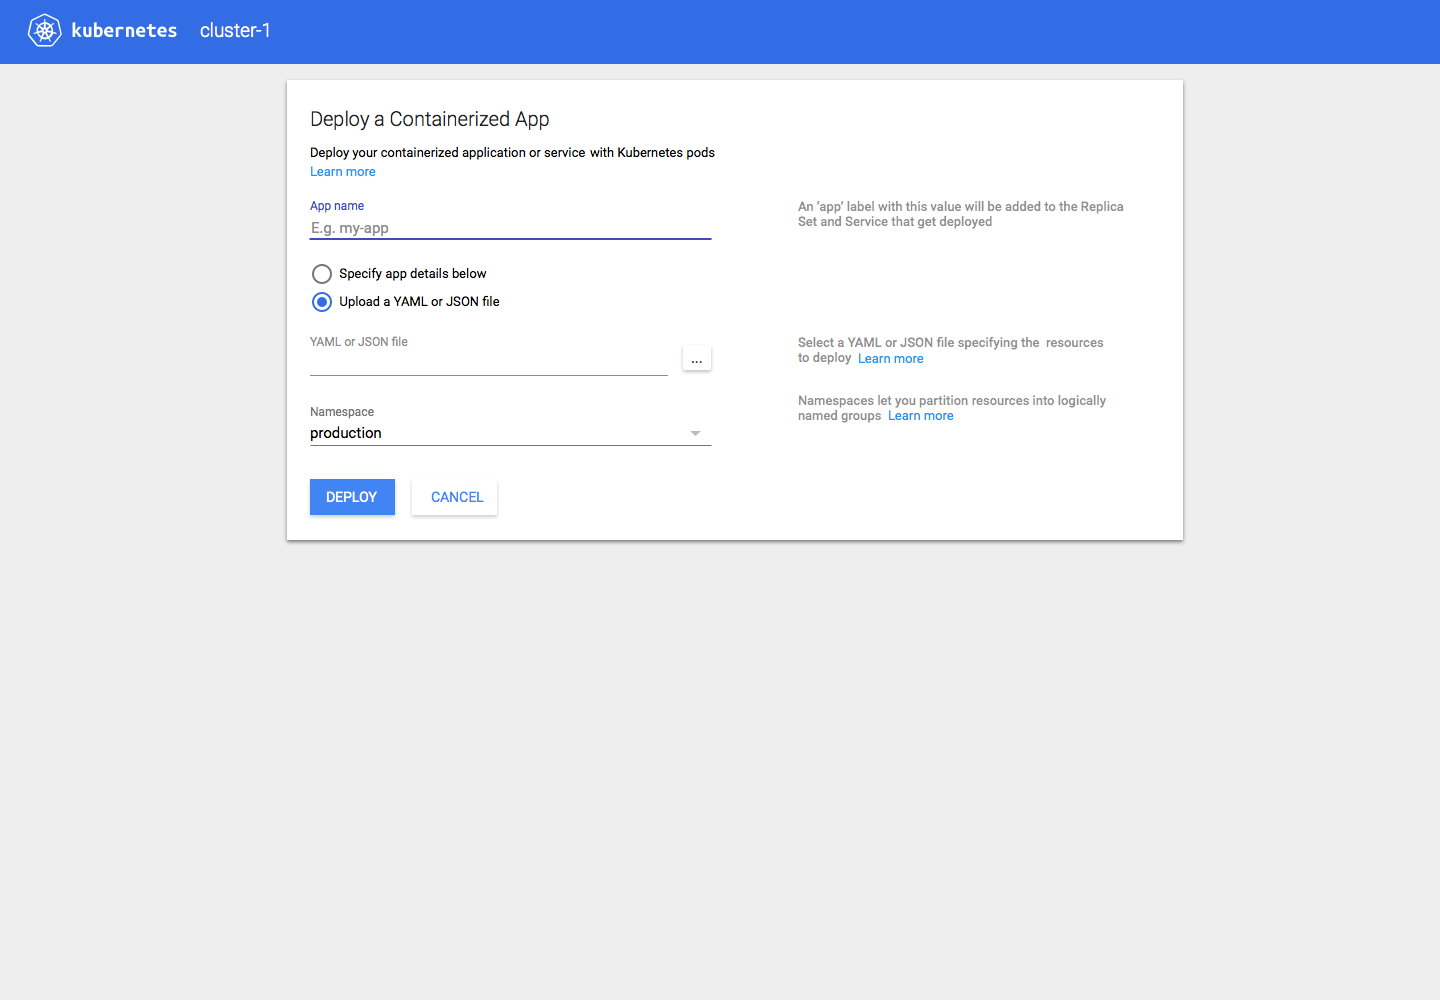 designs/11-11-2015/07_deploy form new namespace.png